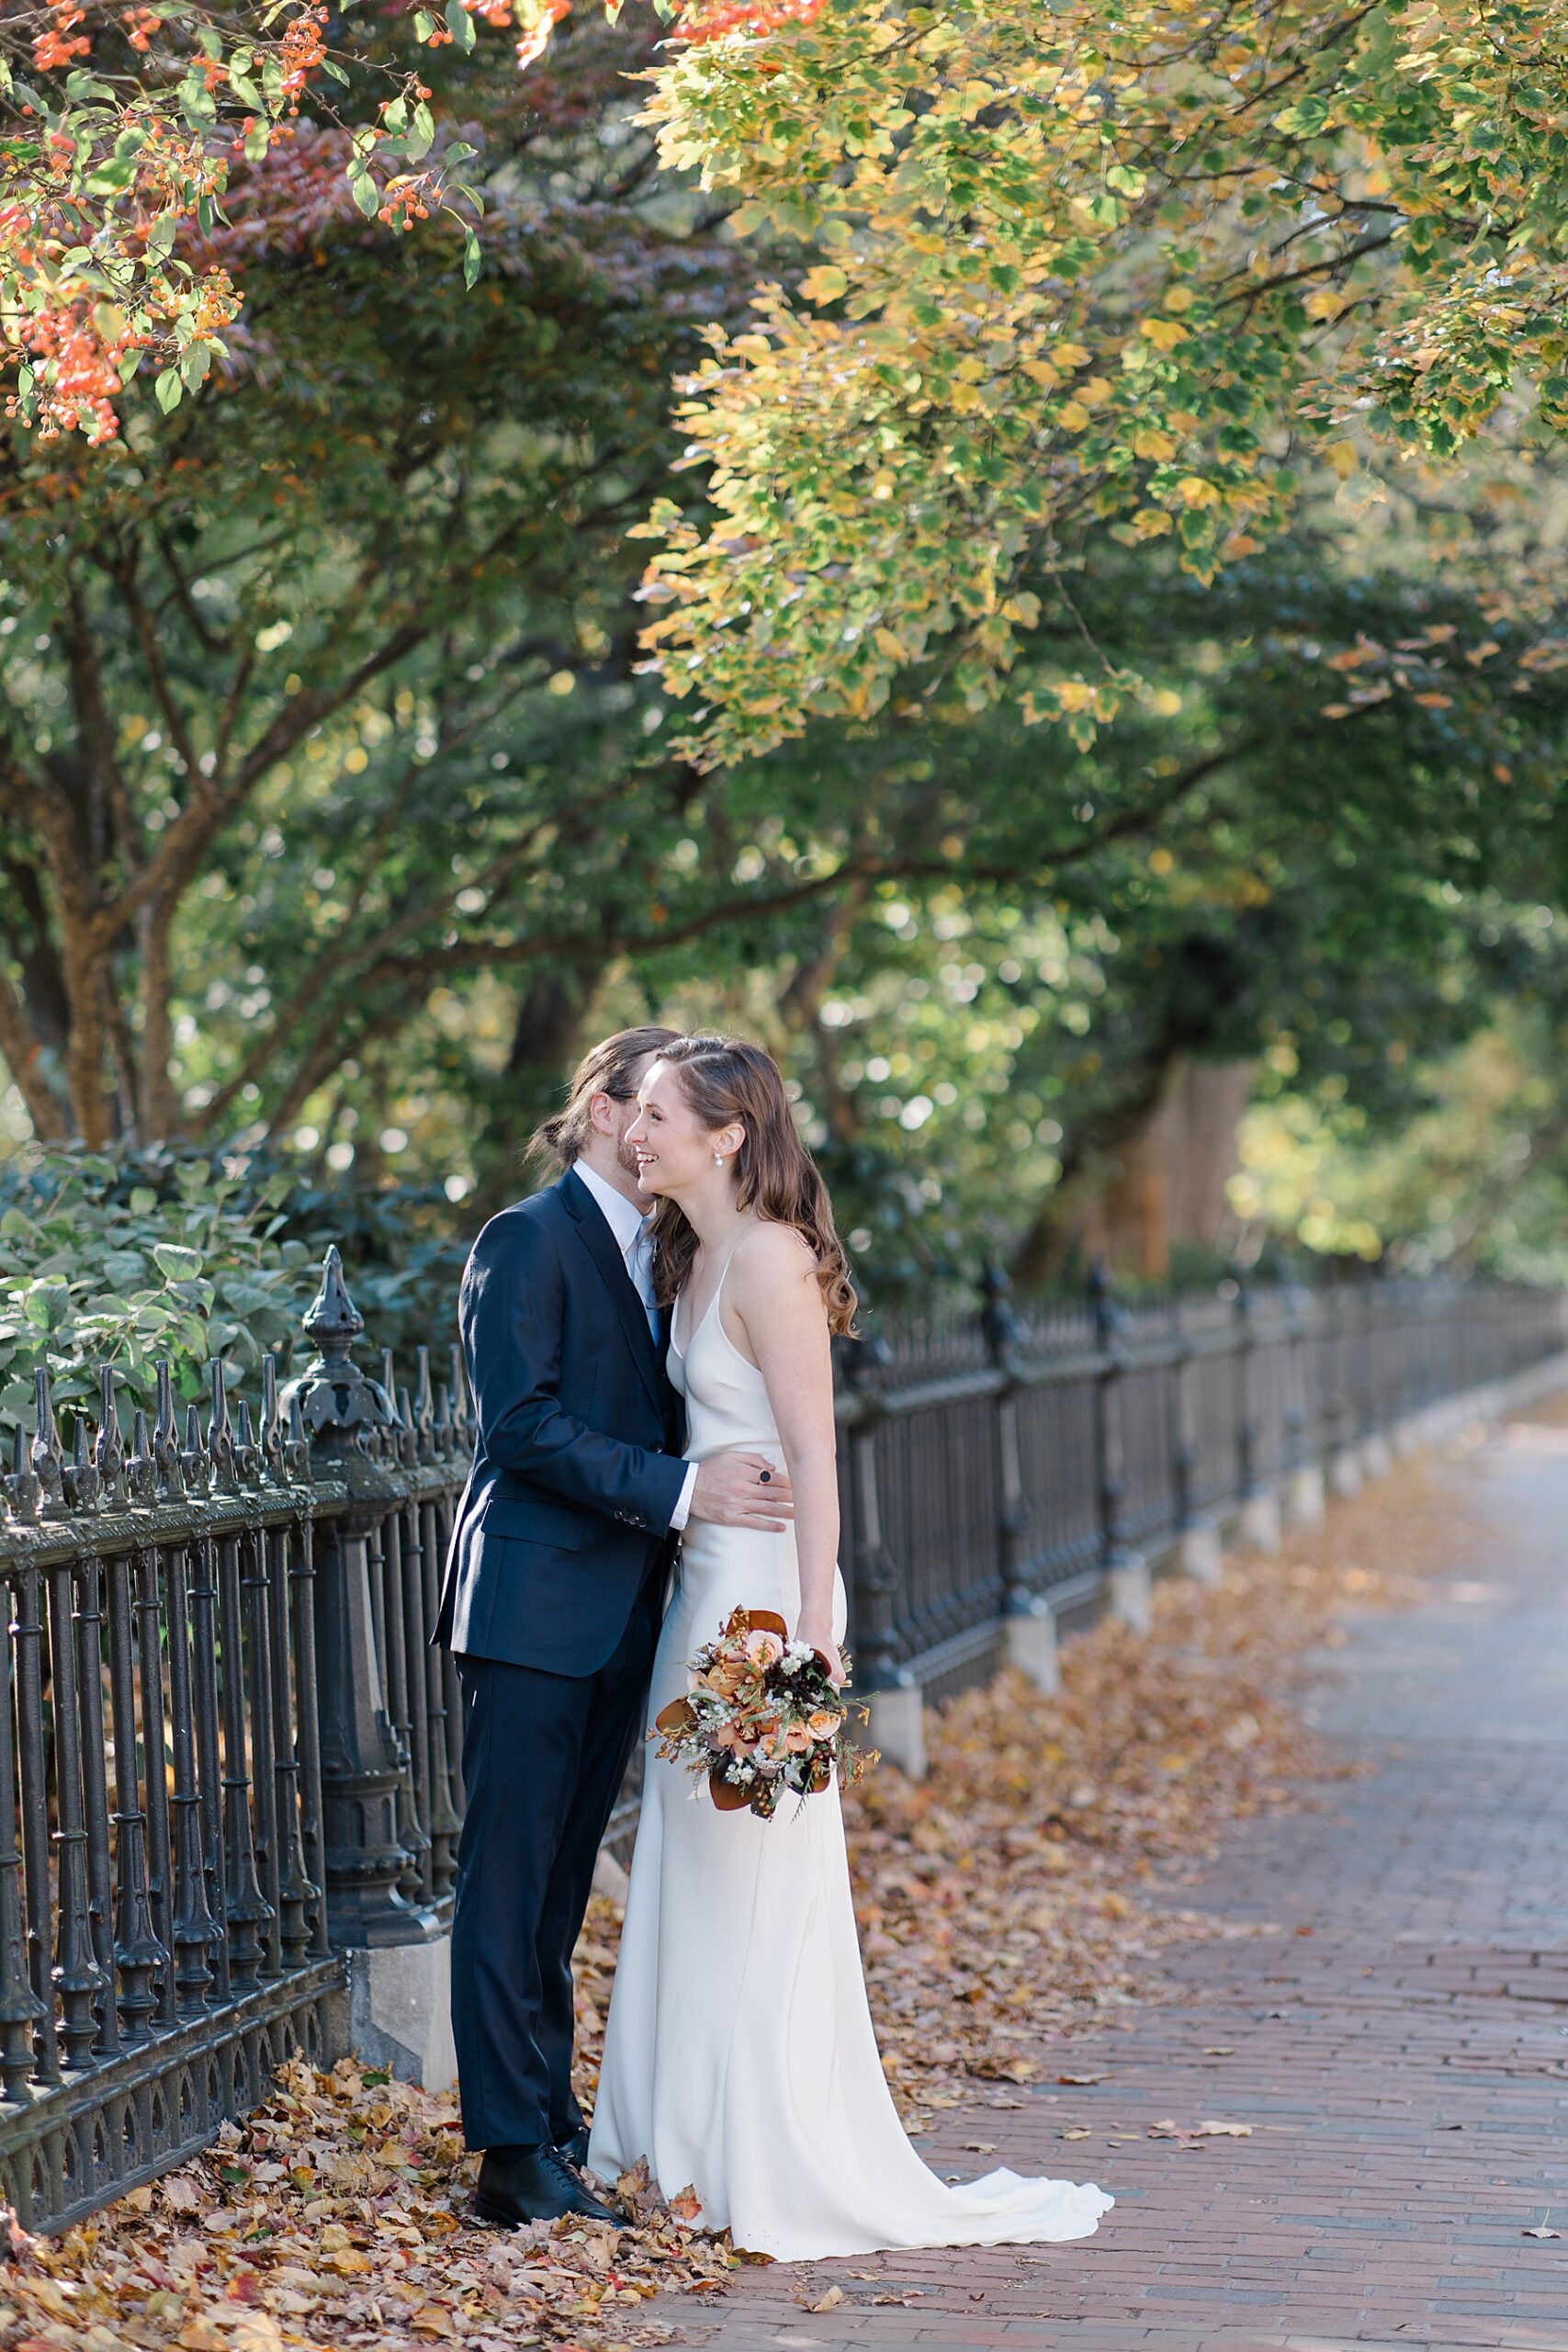 candid wedding portraits in Beacon Hill